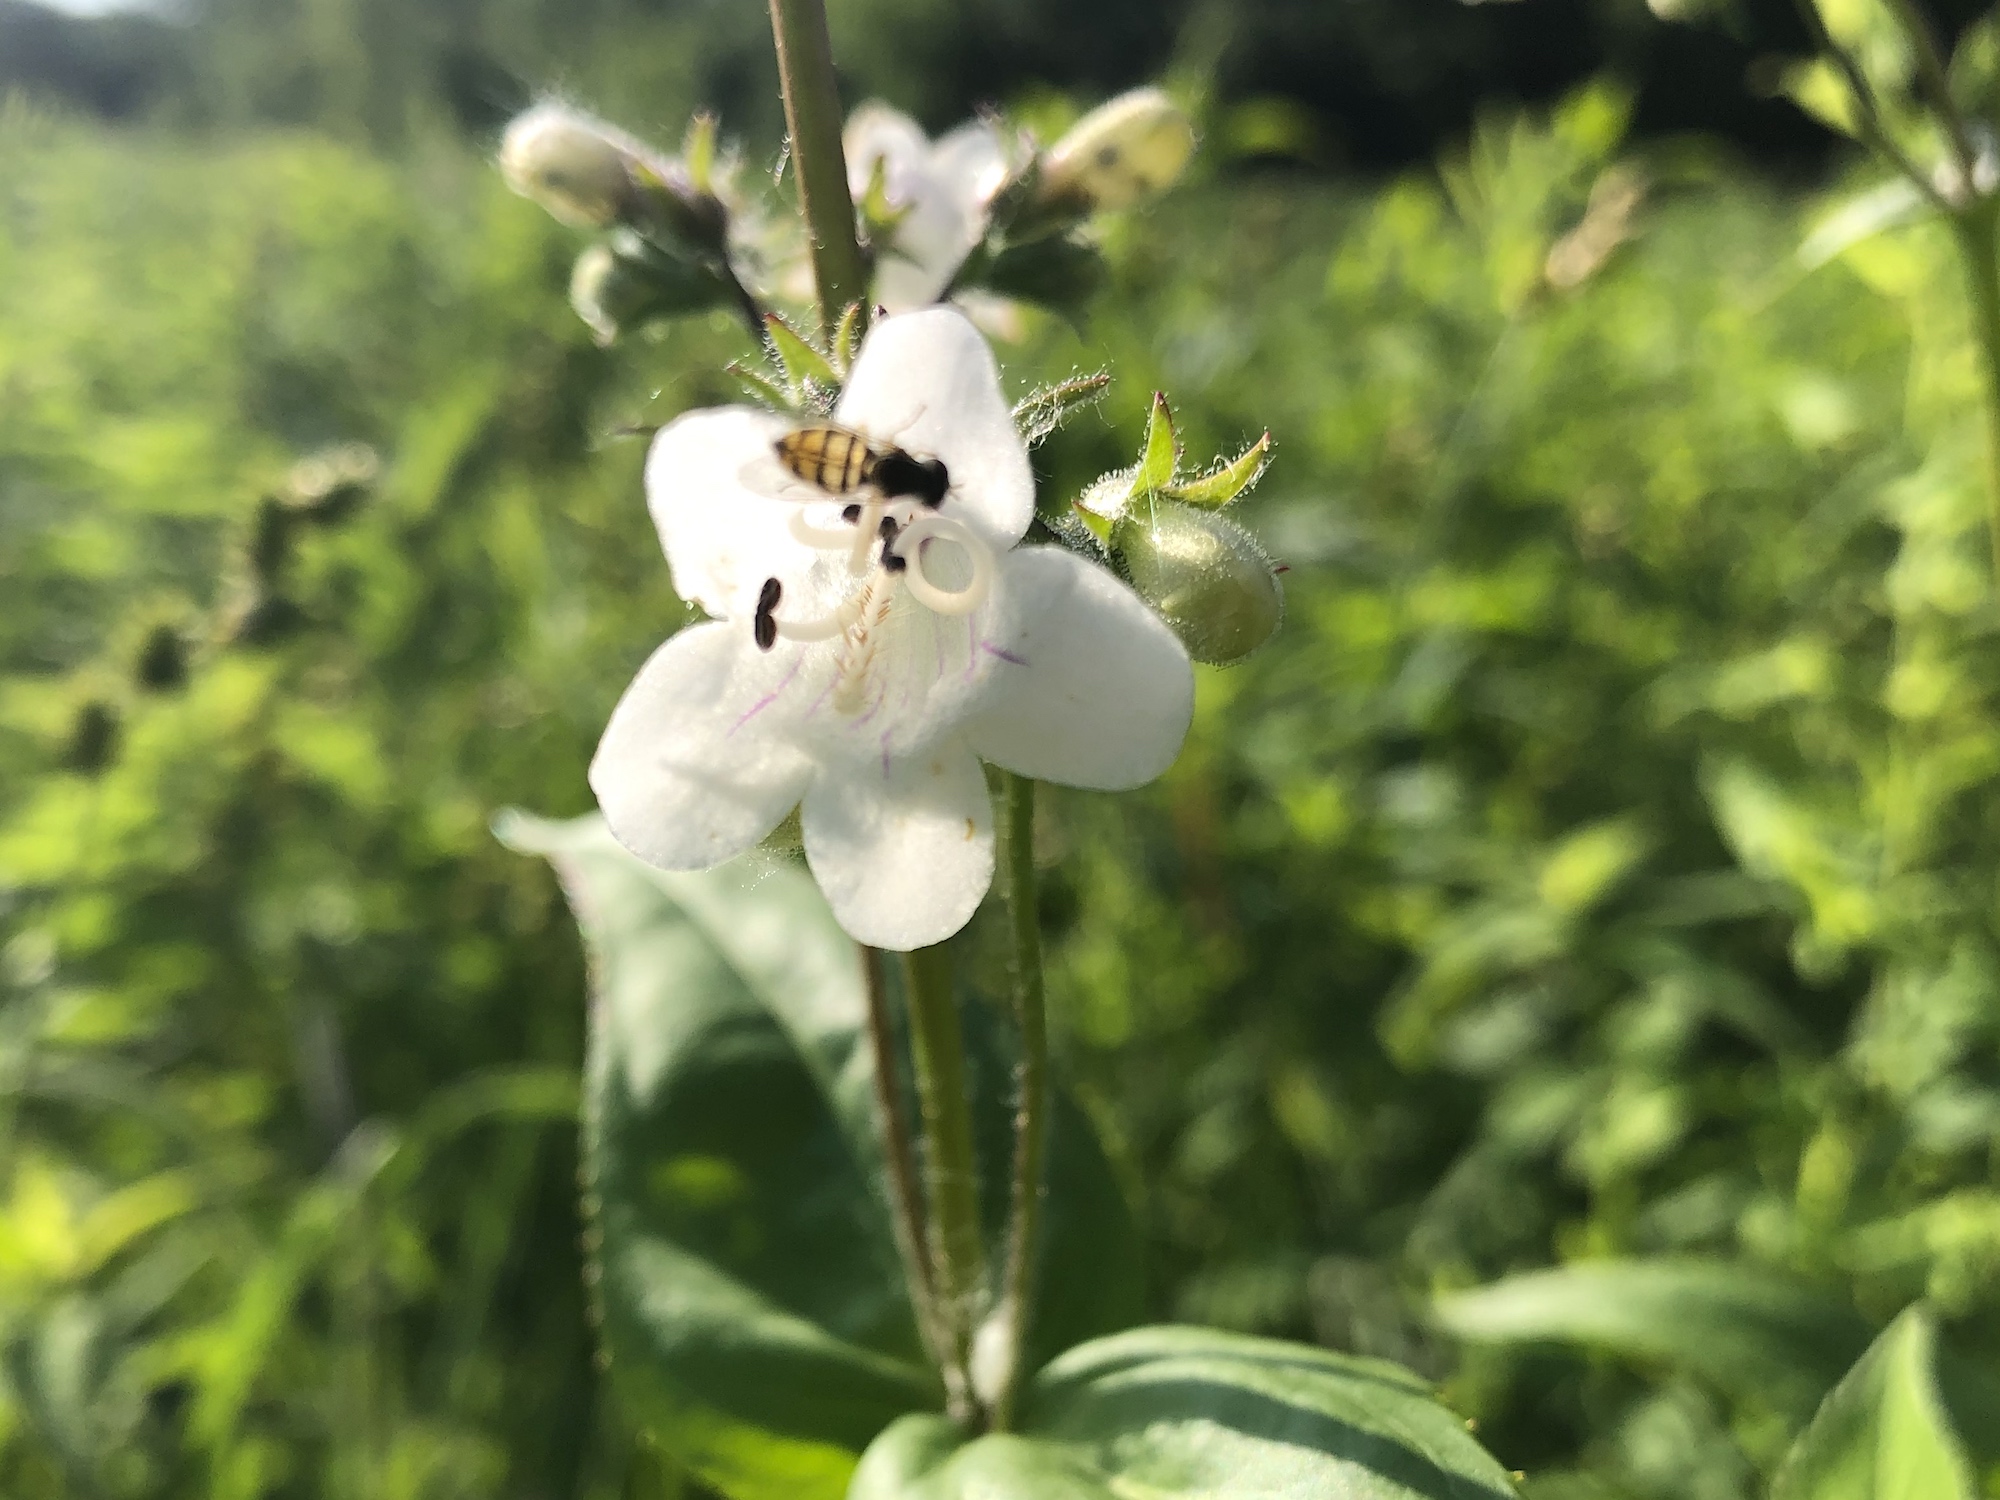 Foxglove Beardtongue on the banks of the retaining pond on June 15, 2019.